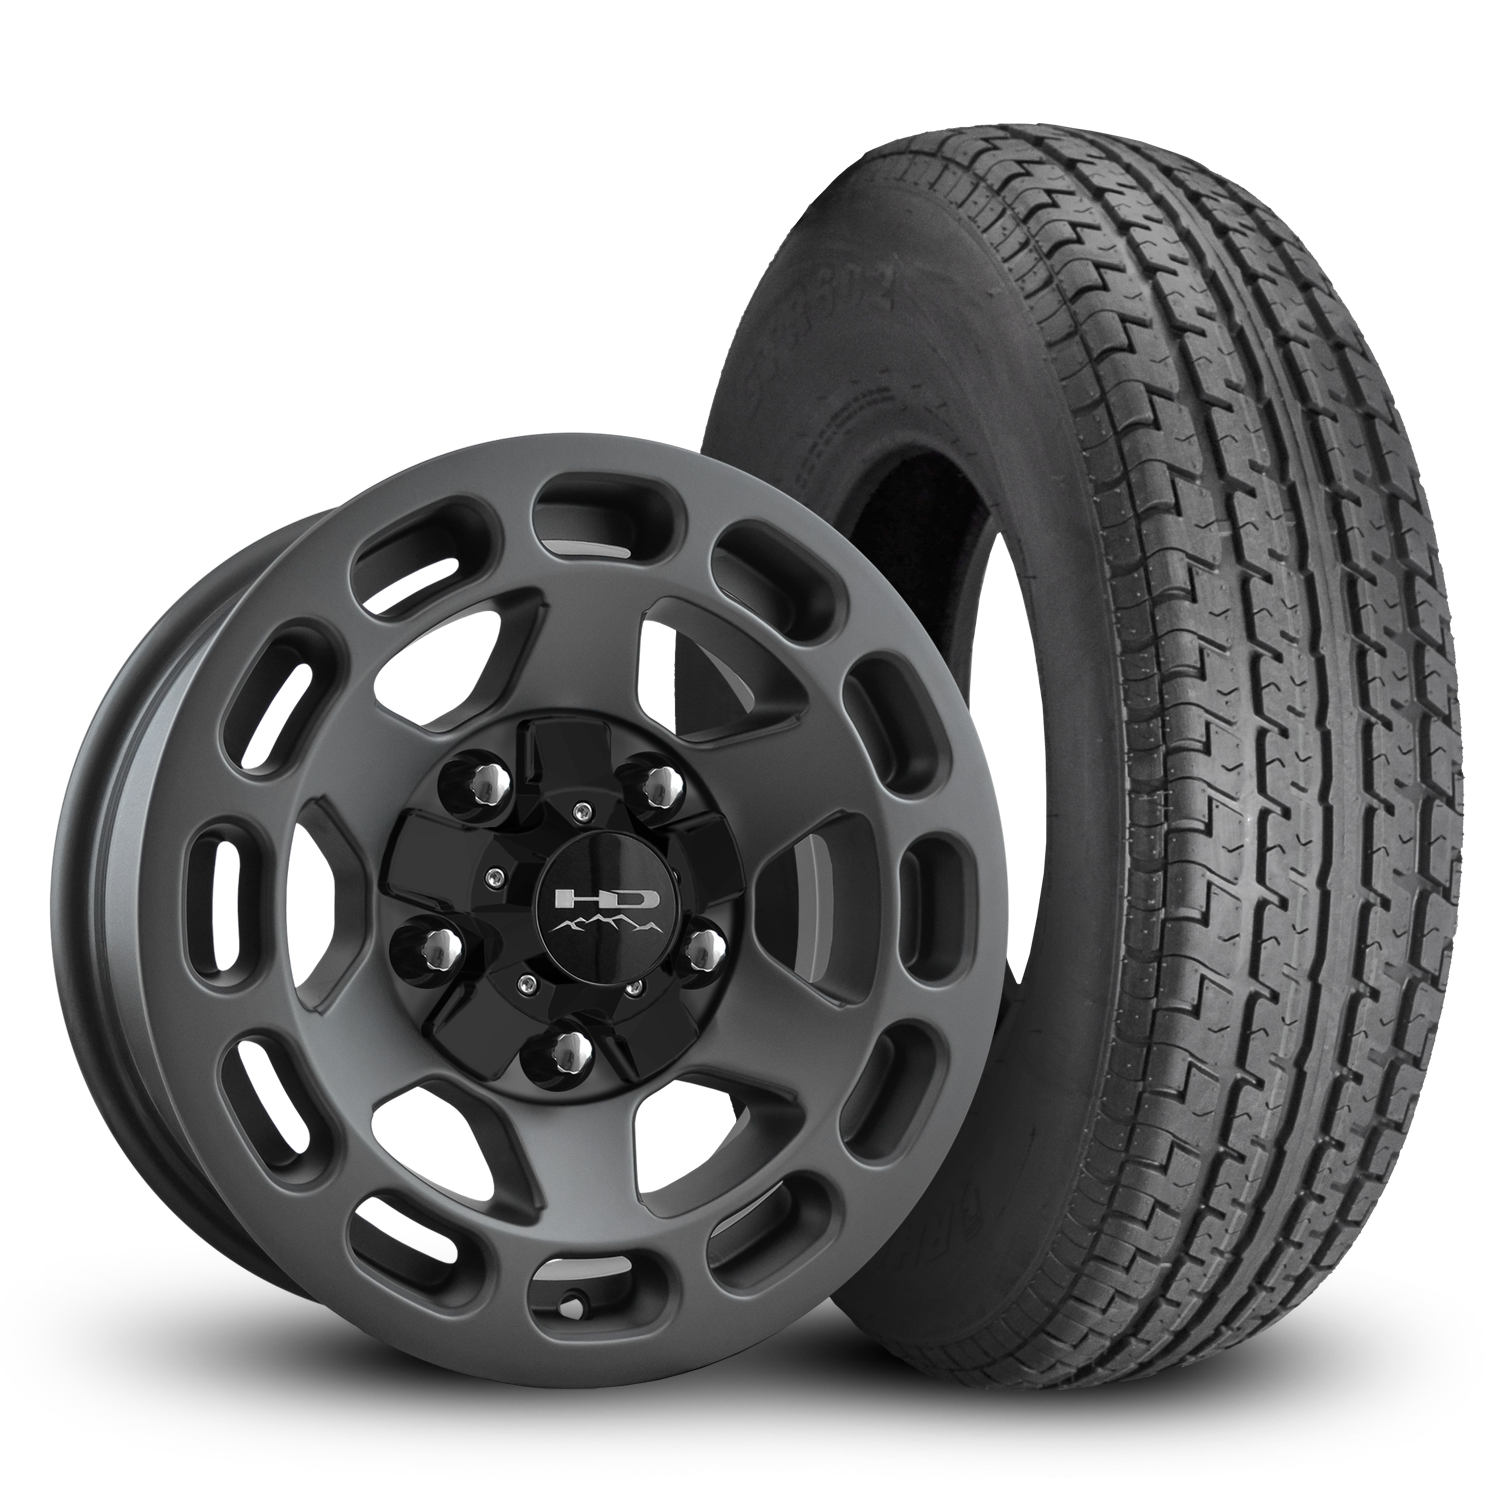 HD Off-Road Patriot Custom Trailer Wheel & Tire packages in 15x6.0 in 5 lug All Satin Grey for Unility, Boat, Car, Construction, Horse, & RV